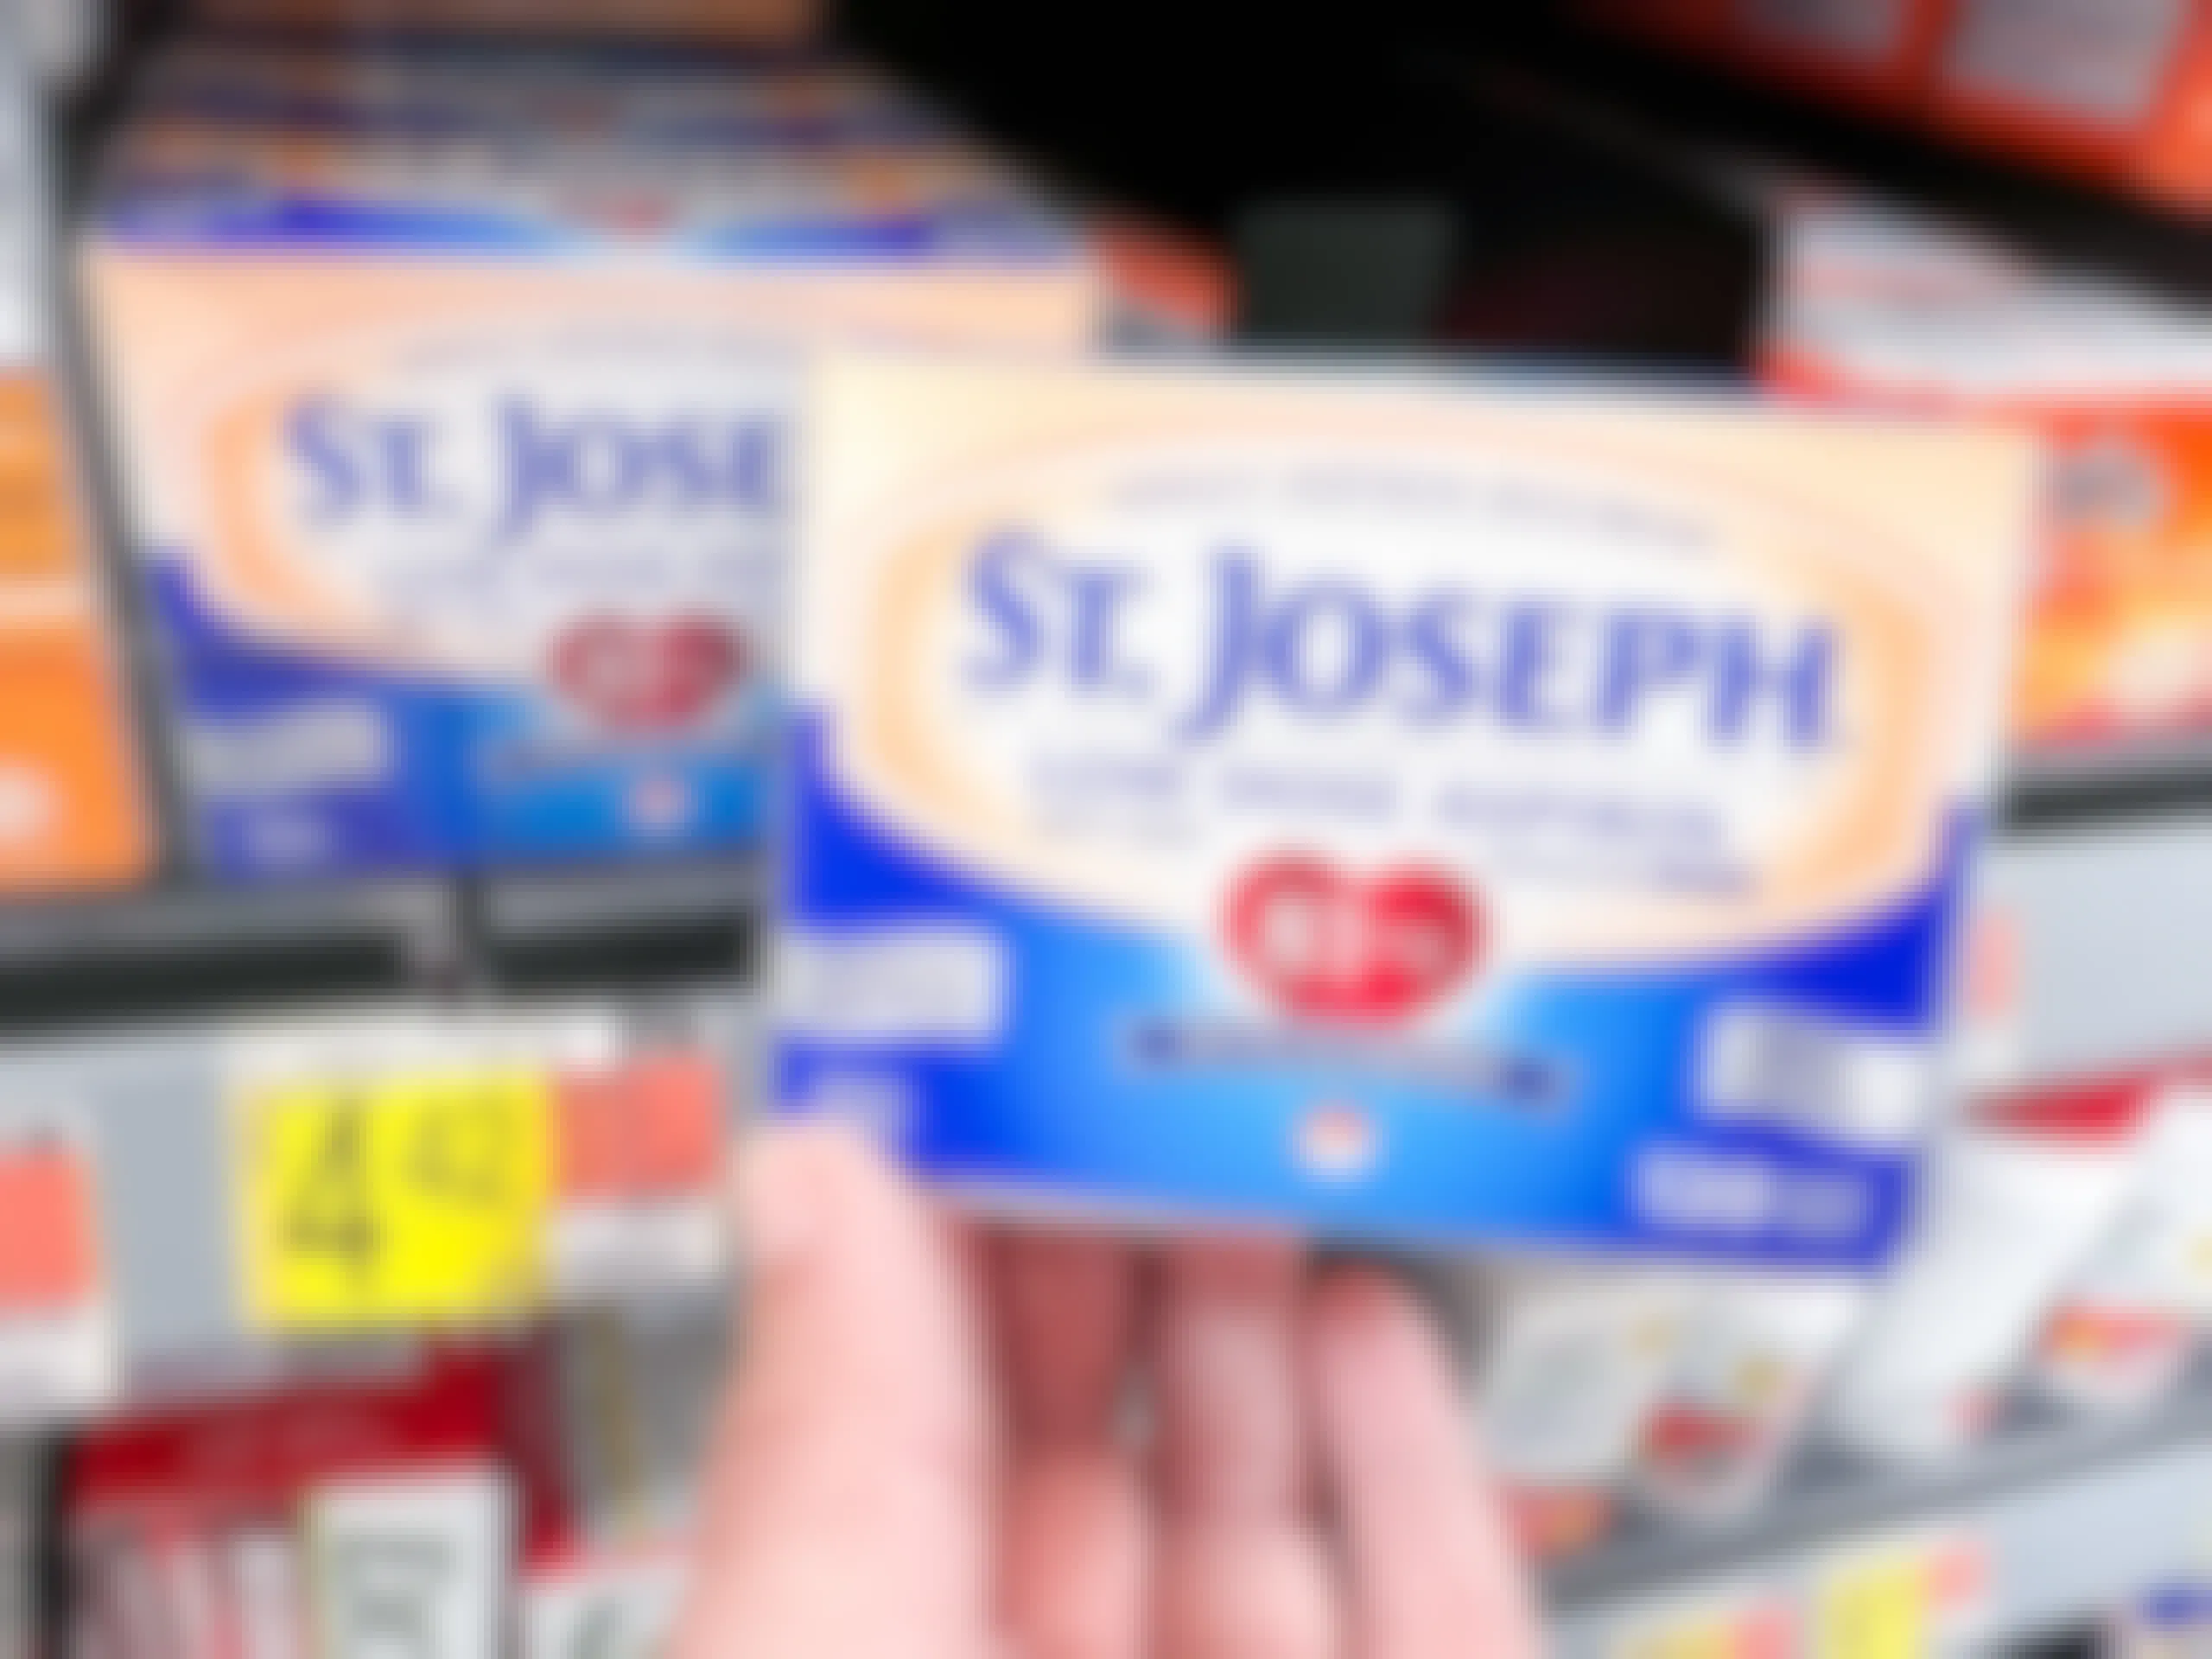 St. Joseph Low Dose Aspirin held in front of shelf at Walmart. Price tag reads $4.42.